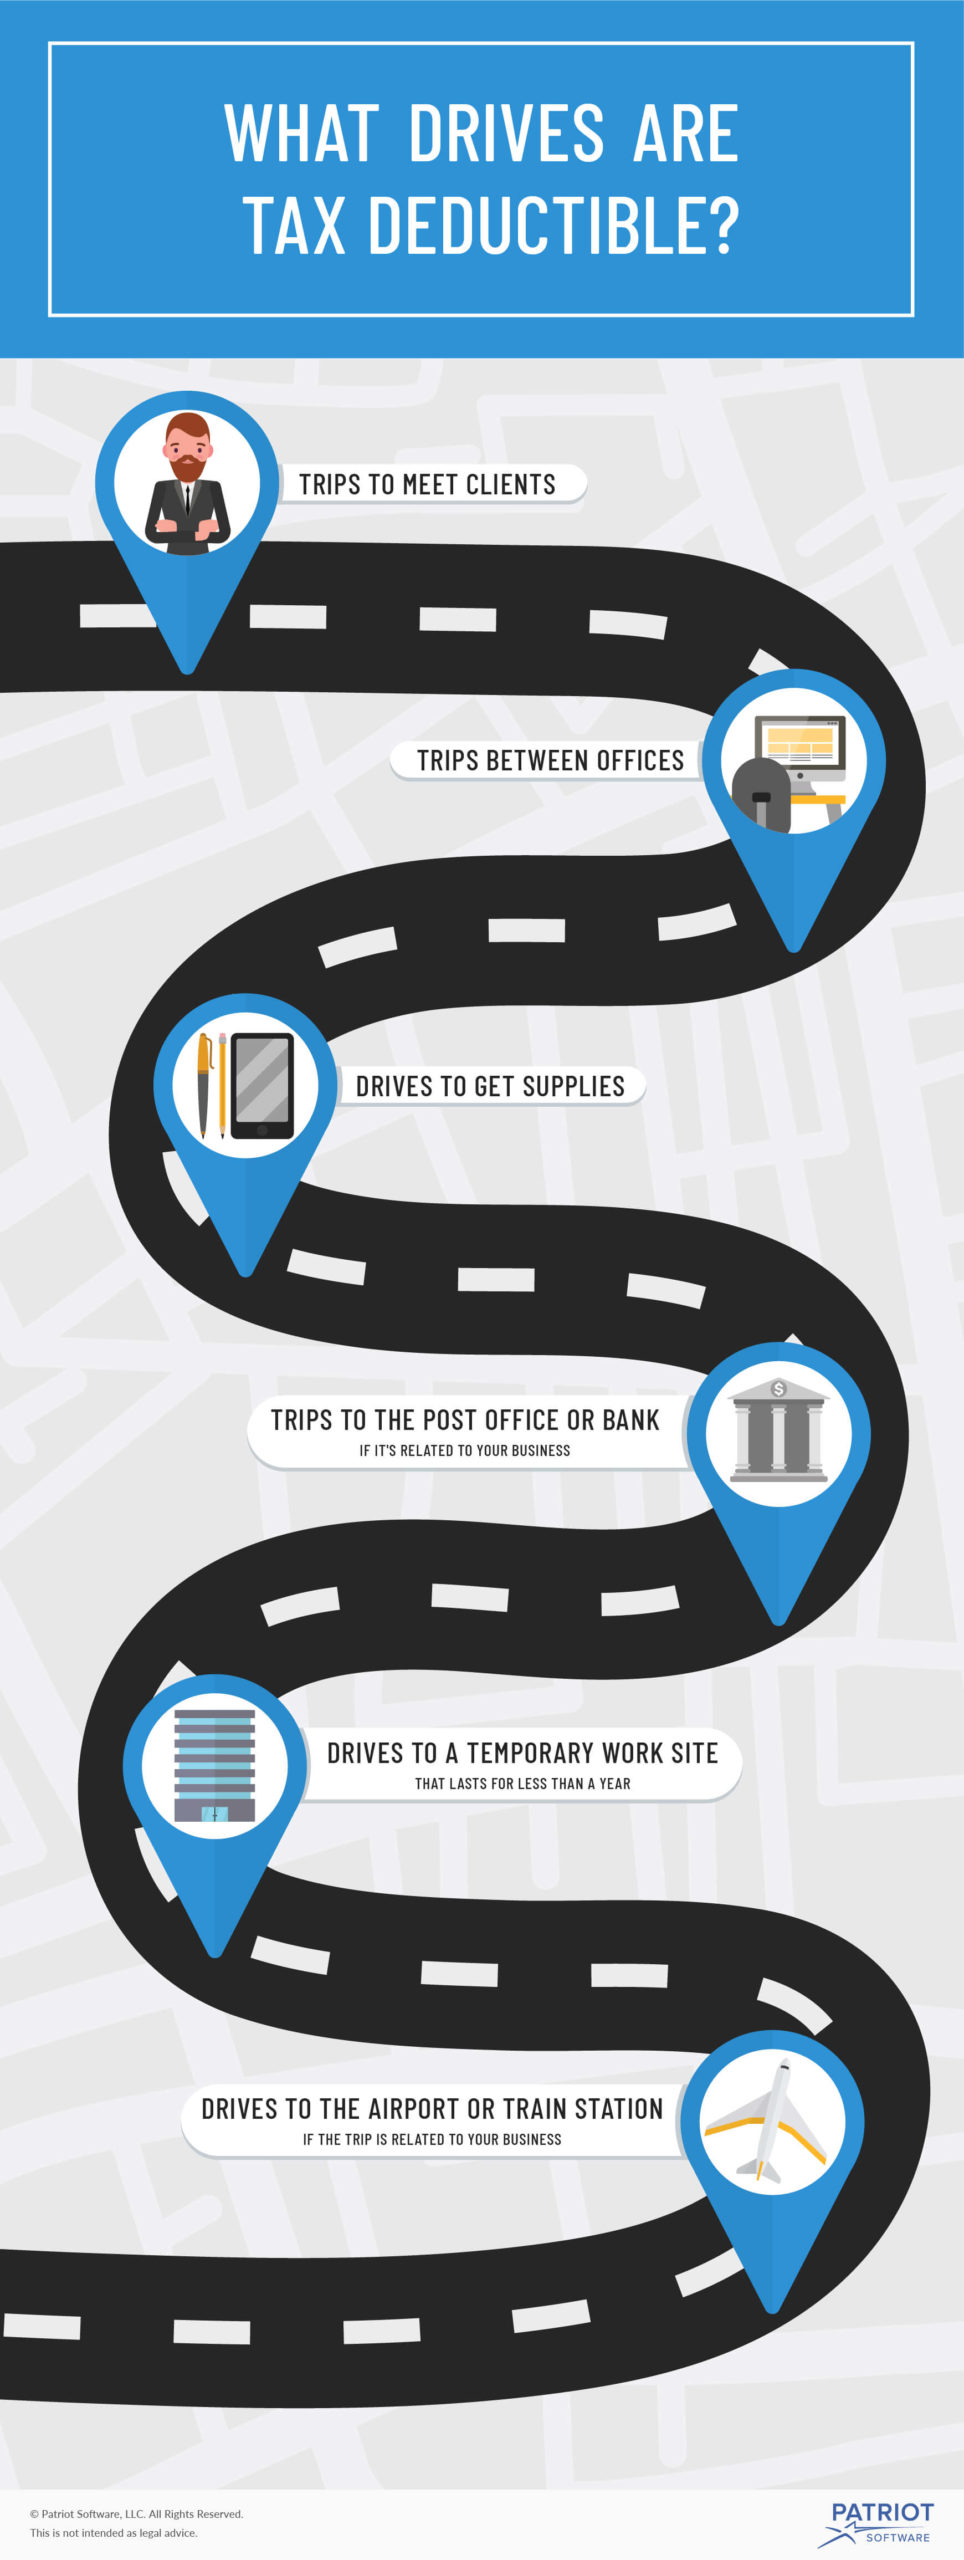 Infographic: What Drives Are Tax Deductible?